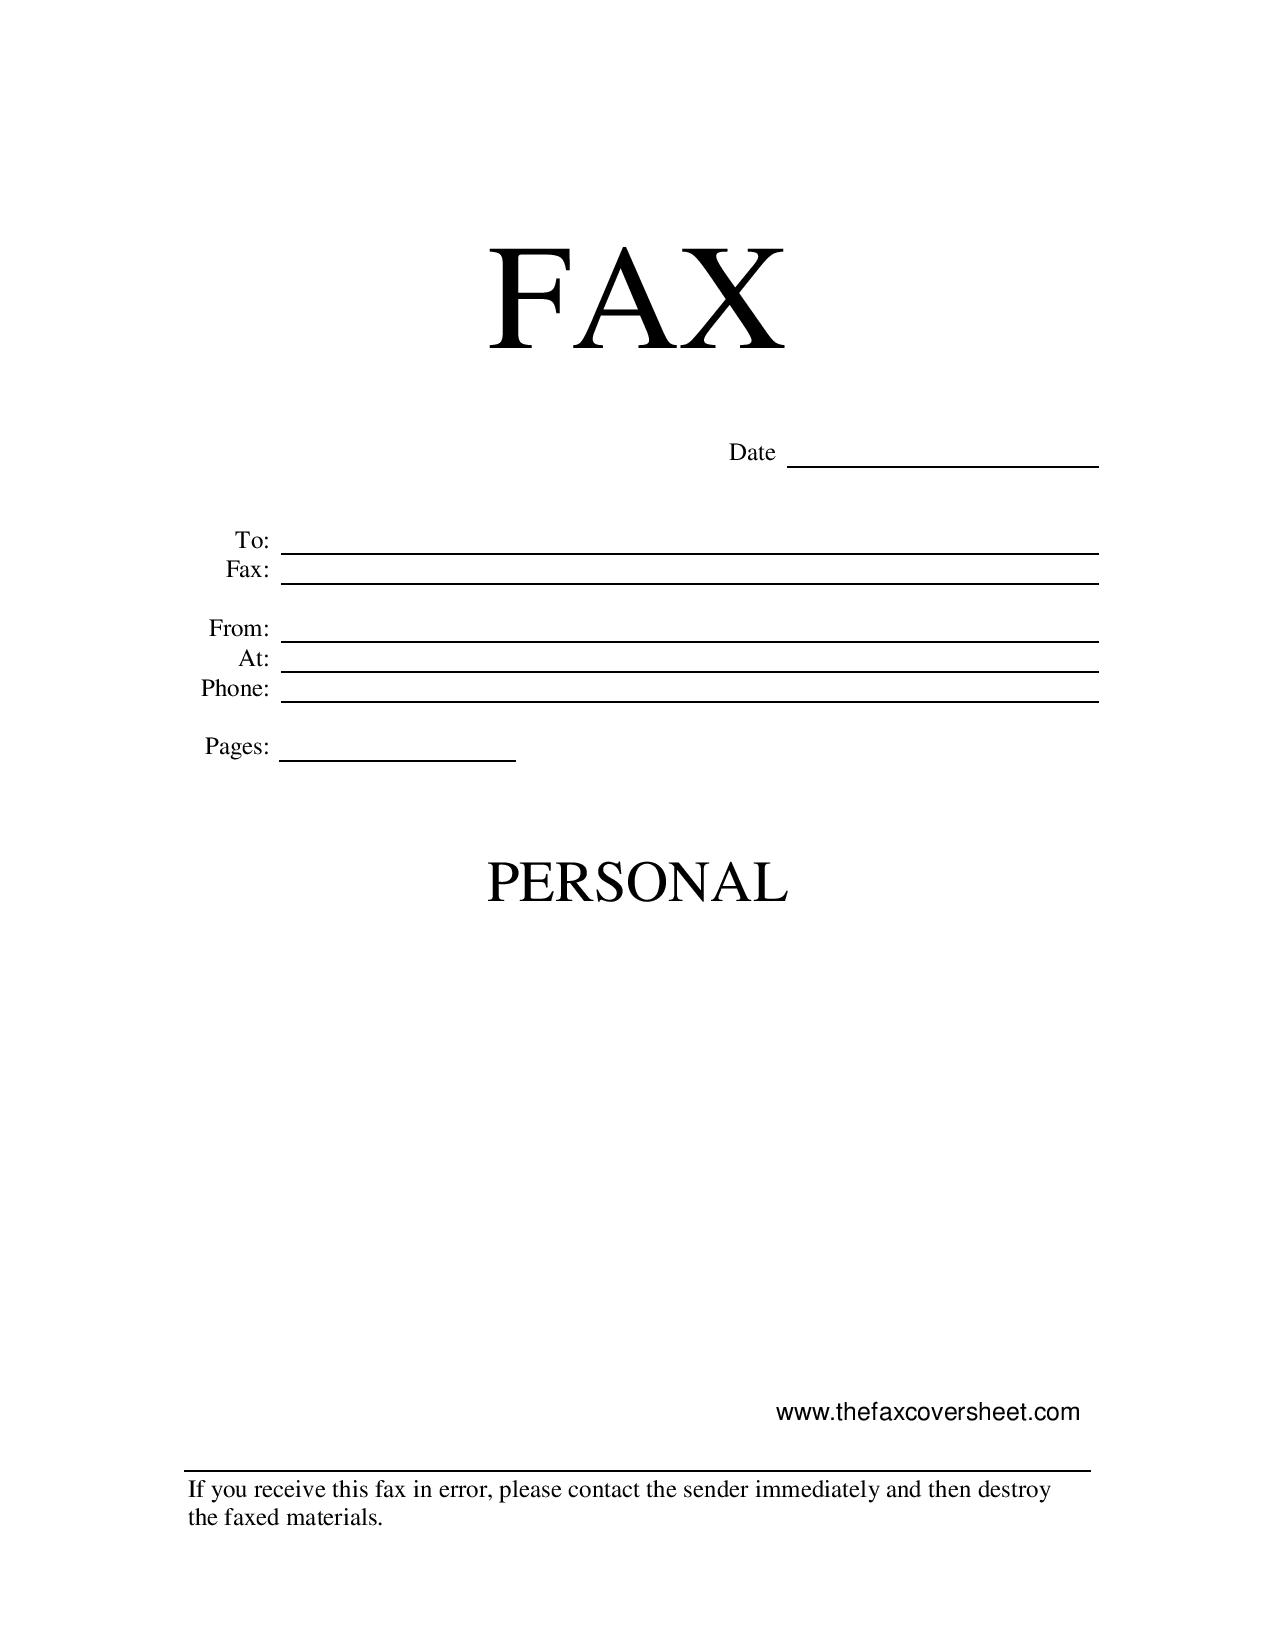 Free Printable Fax Cover Sheet Without Downloading